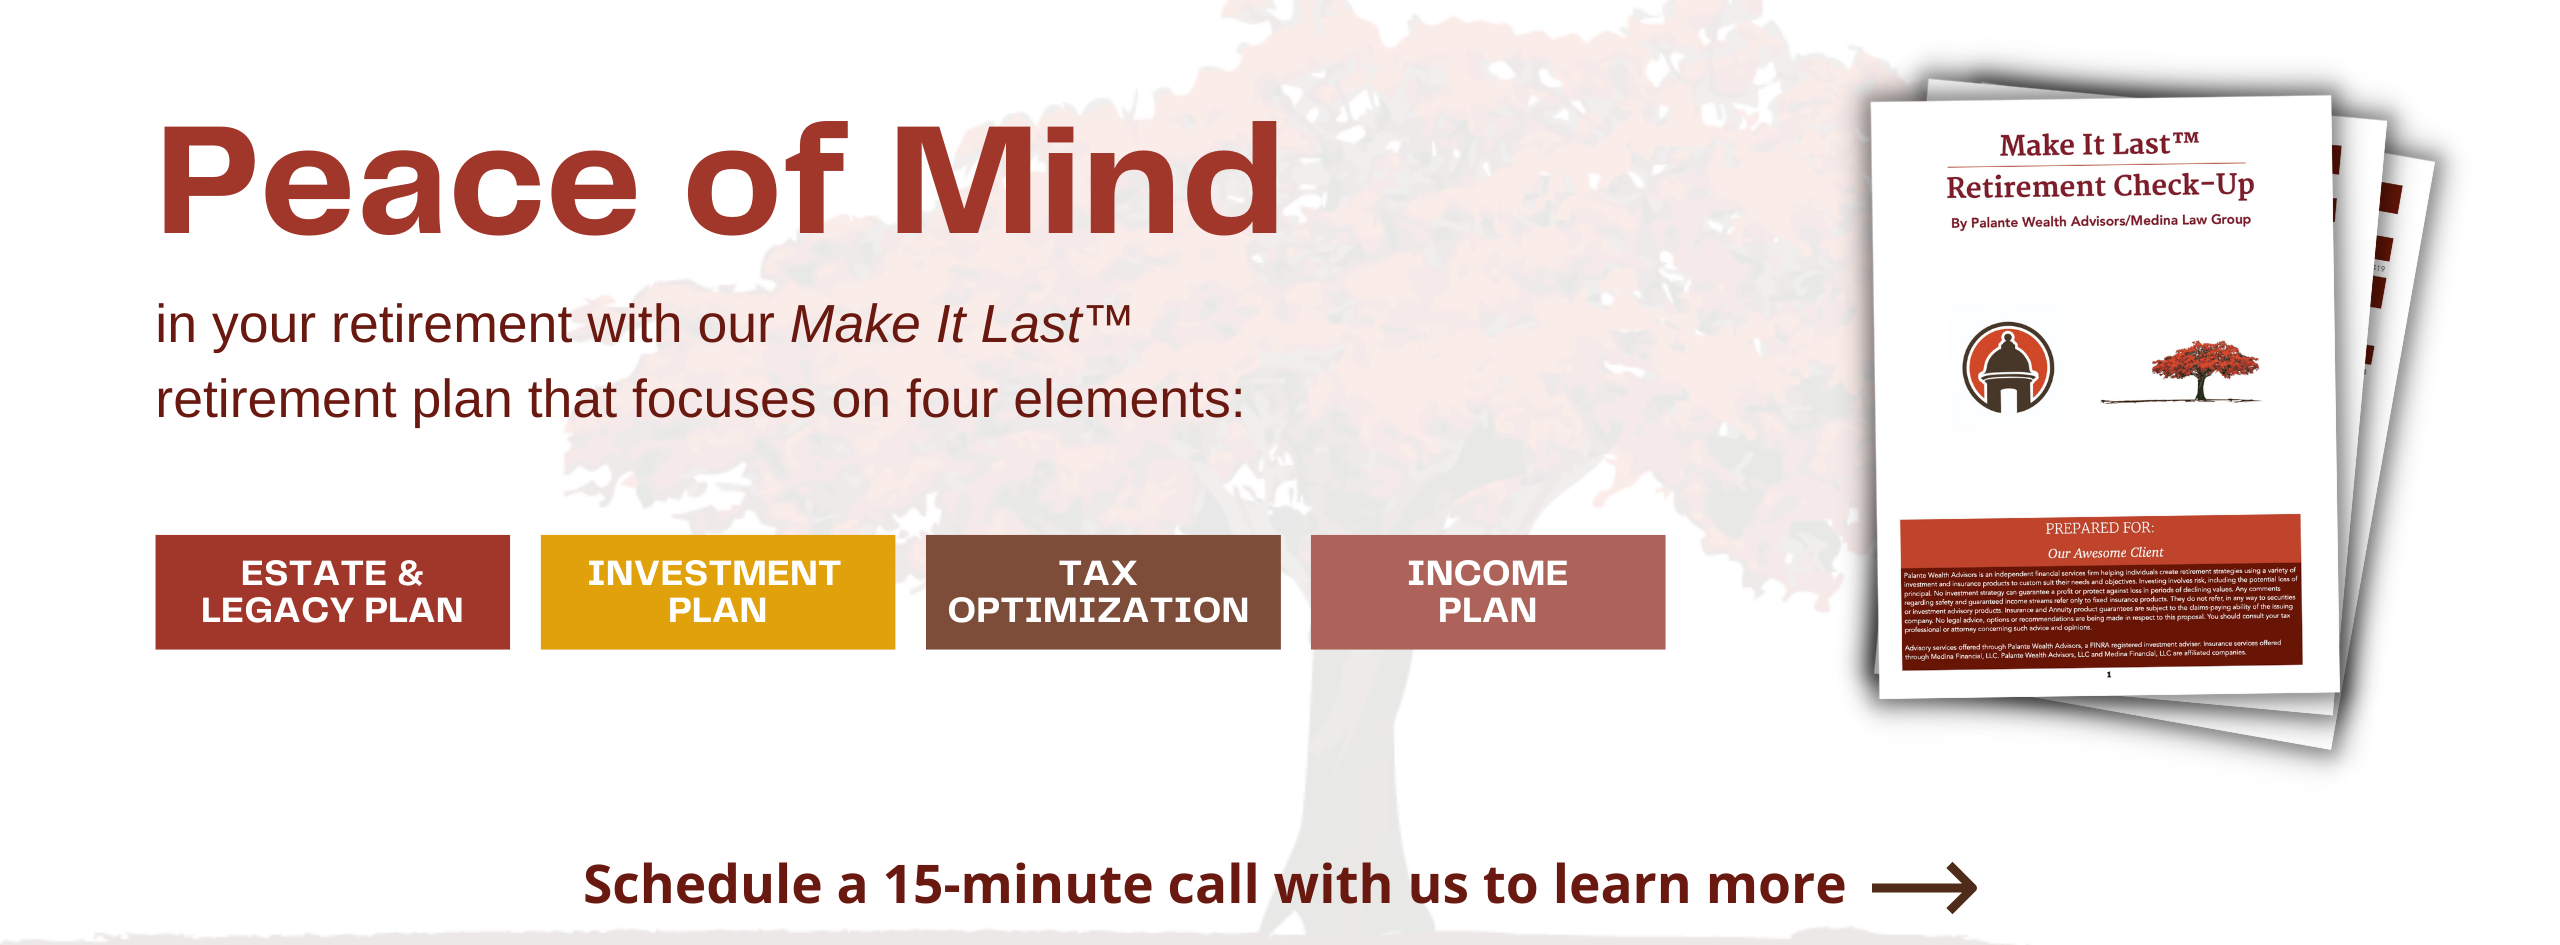 Peace of Mind in your retirement with our Make It Last retirement plan that focuses on four elements: Estate & Legacy Plan, Investment Plan, Tax Optimization, and Income Plan. Schedule a 15 minute call with us to learn more